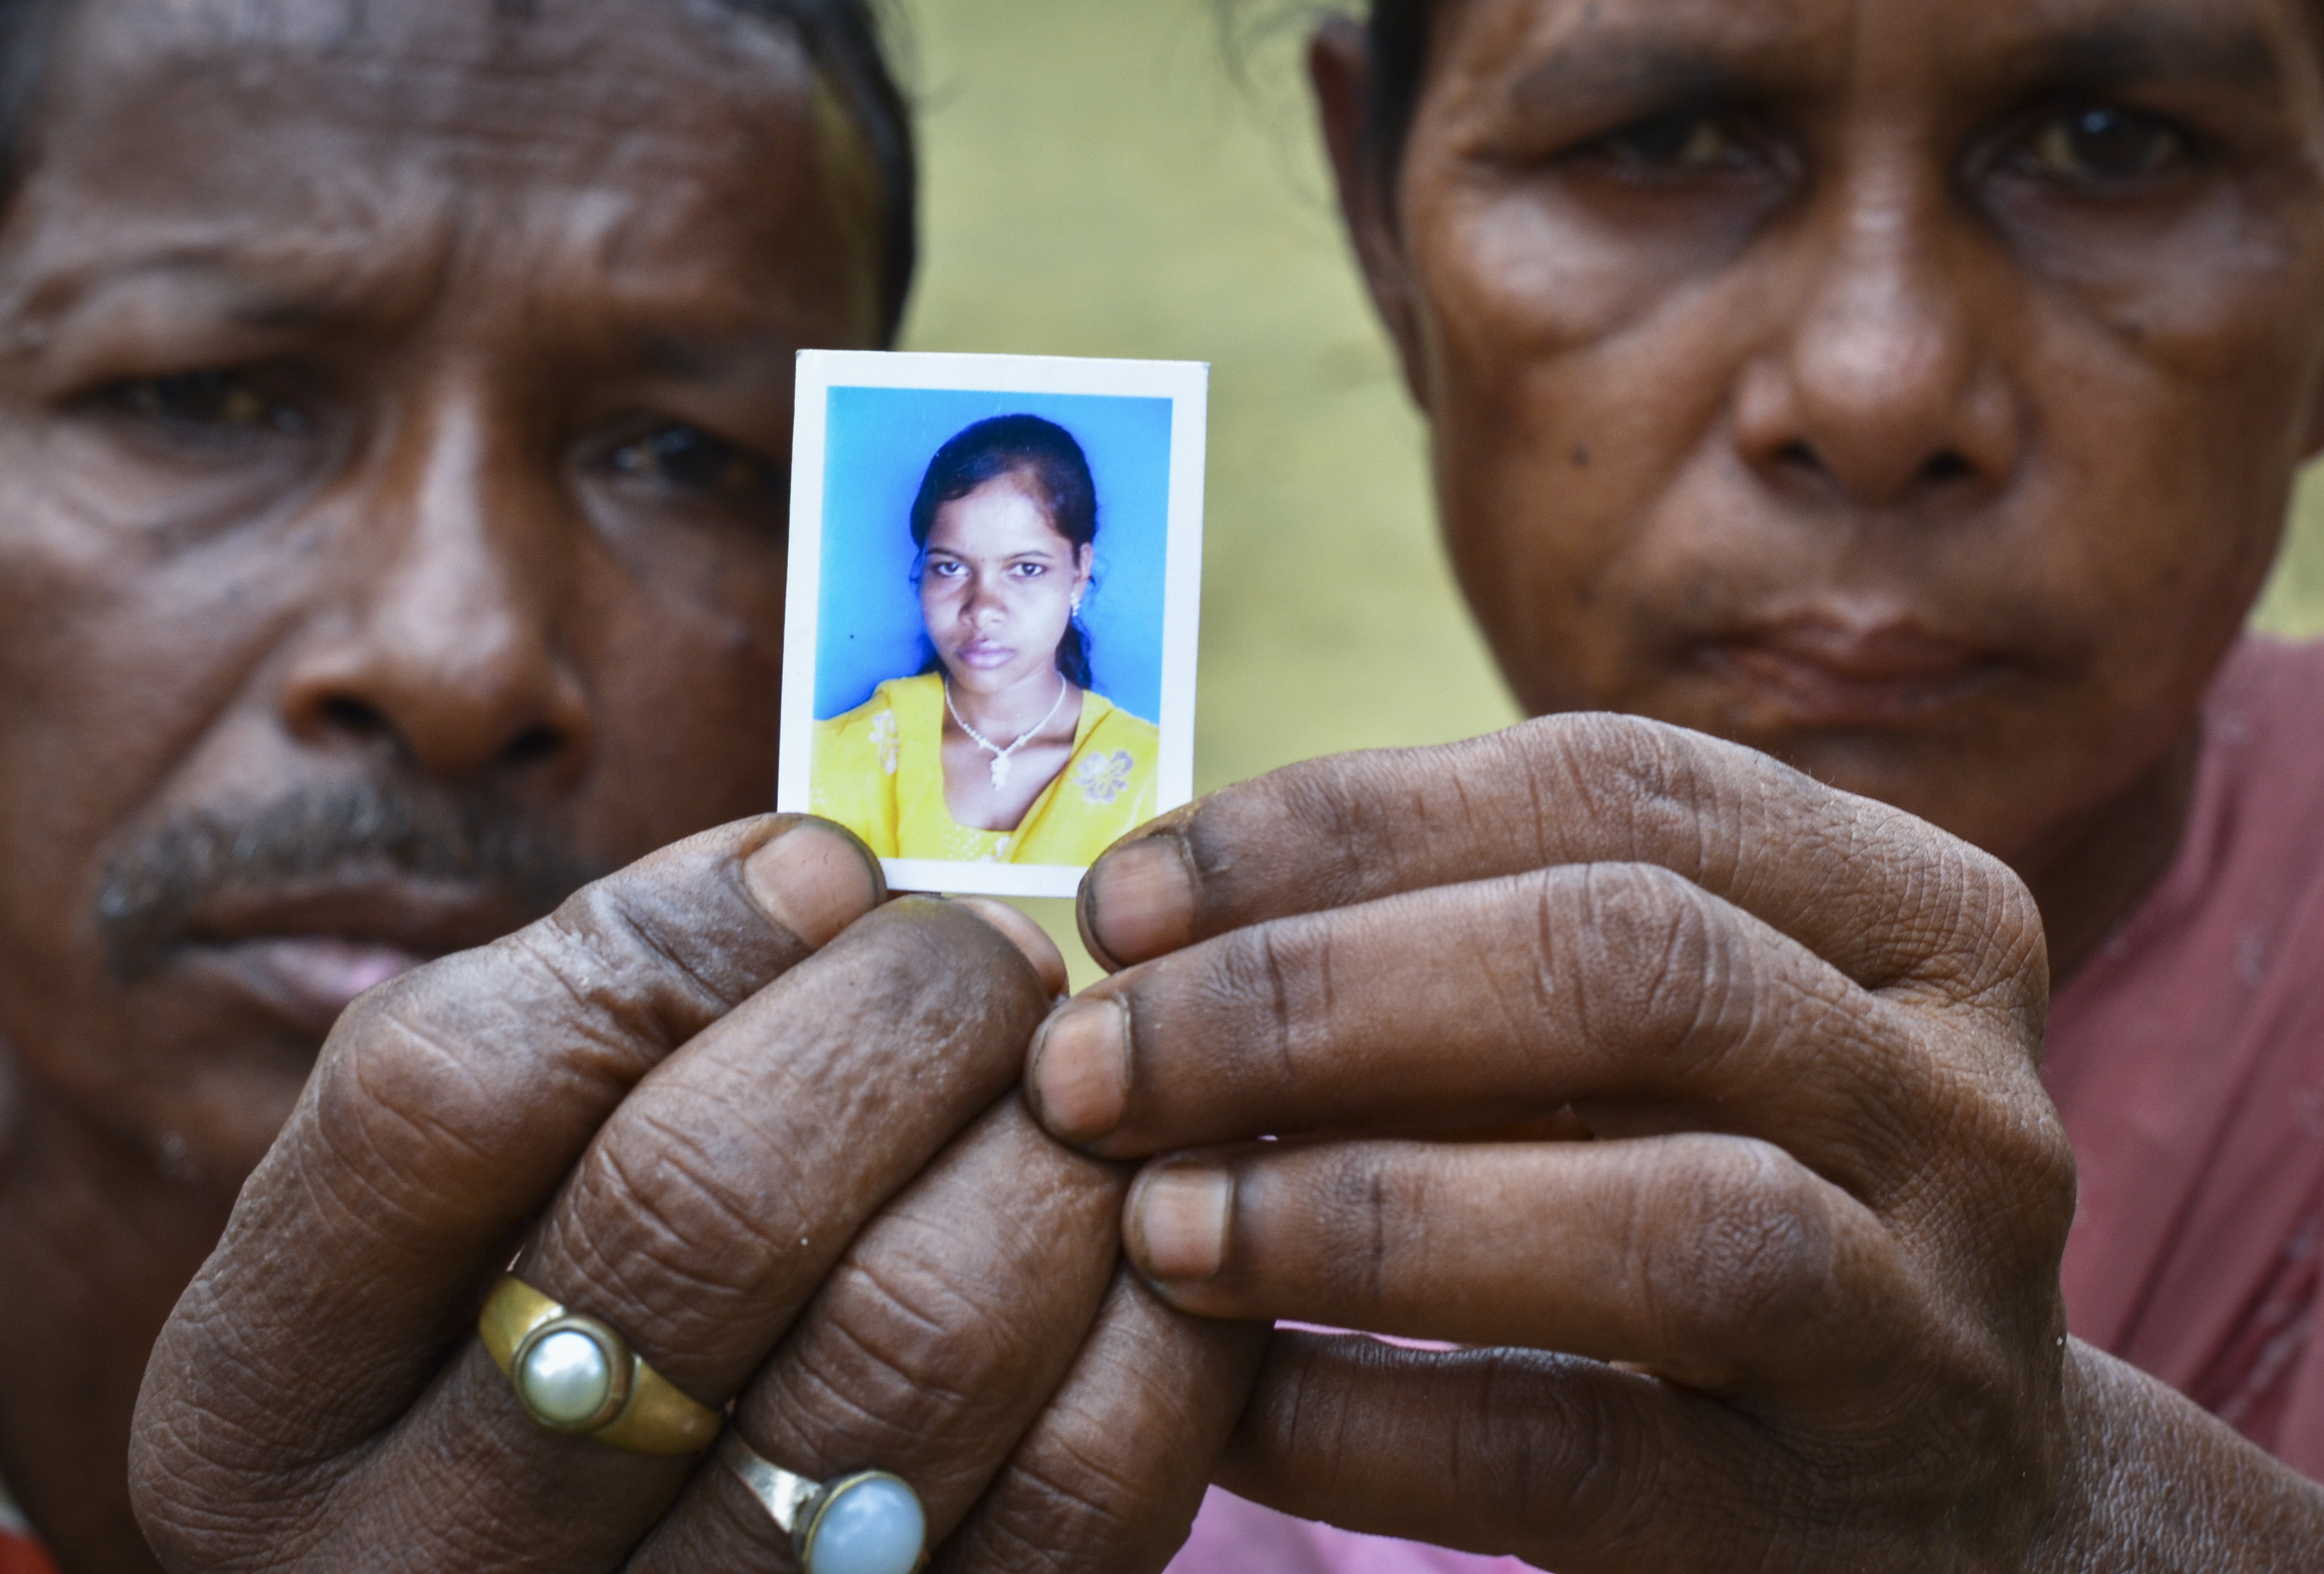 This image taken on June 20, 2013 shows Arjun Tati, 55, and Mukti Tati, 50, with a picture of their daughter Binita Tati, who was trafficked to Delhi from Laluk, Lakhimpur district, Assam, at the age of 14. Tati would now be 17, but her distraught parents have not seen her since. Tens of thousands of girls as young as 12 are trafficked from India‚Äôs remote north east every year. Many are the daughters of tea estate workers, whose low pay means they are unable to afford to look after their families. They end up working as servants in the Indian capital New Delhi or trafficked on to the Middle East and the UK. Many suffer physical and sexual abuse at the hands of employers who keep them locked up in their homes. Few receive the wages they were promised. The trade is driven by the low wages paid to tea plantation workers, who cannot afford to keep their daughters. 20JUN13 (SCMP 04AUG POST MAG)